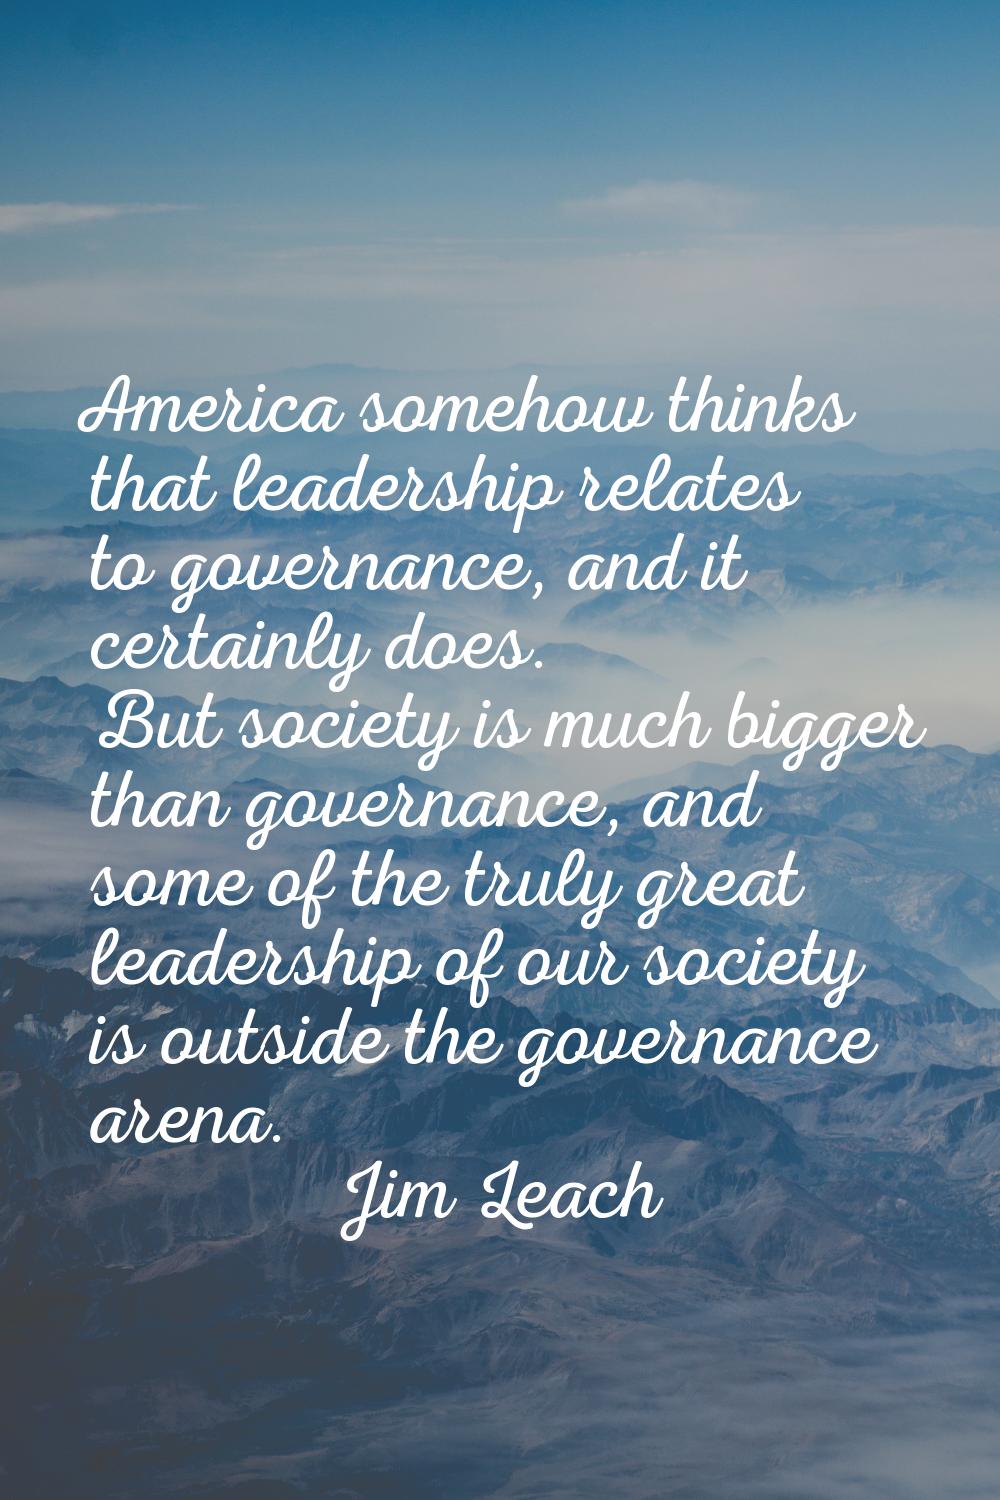 America somehow thinks that leadership relates to governance, and it certainly does. But society is